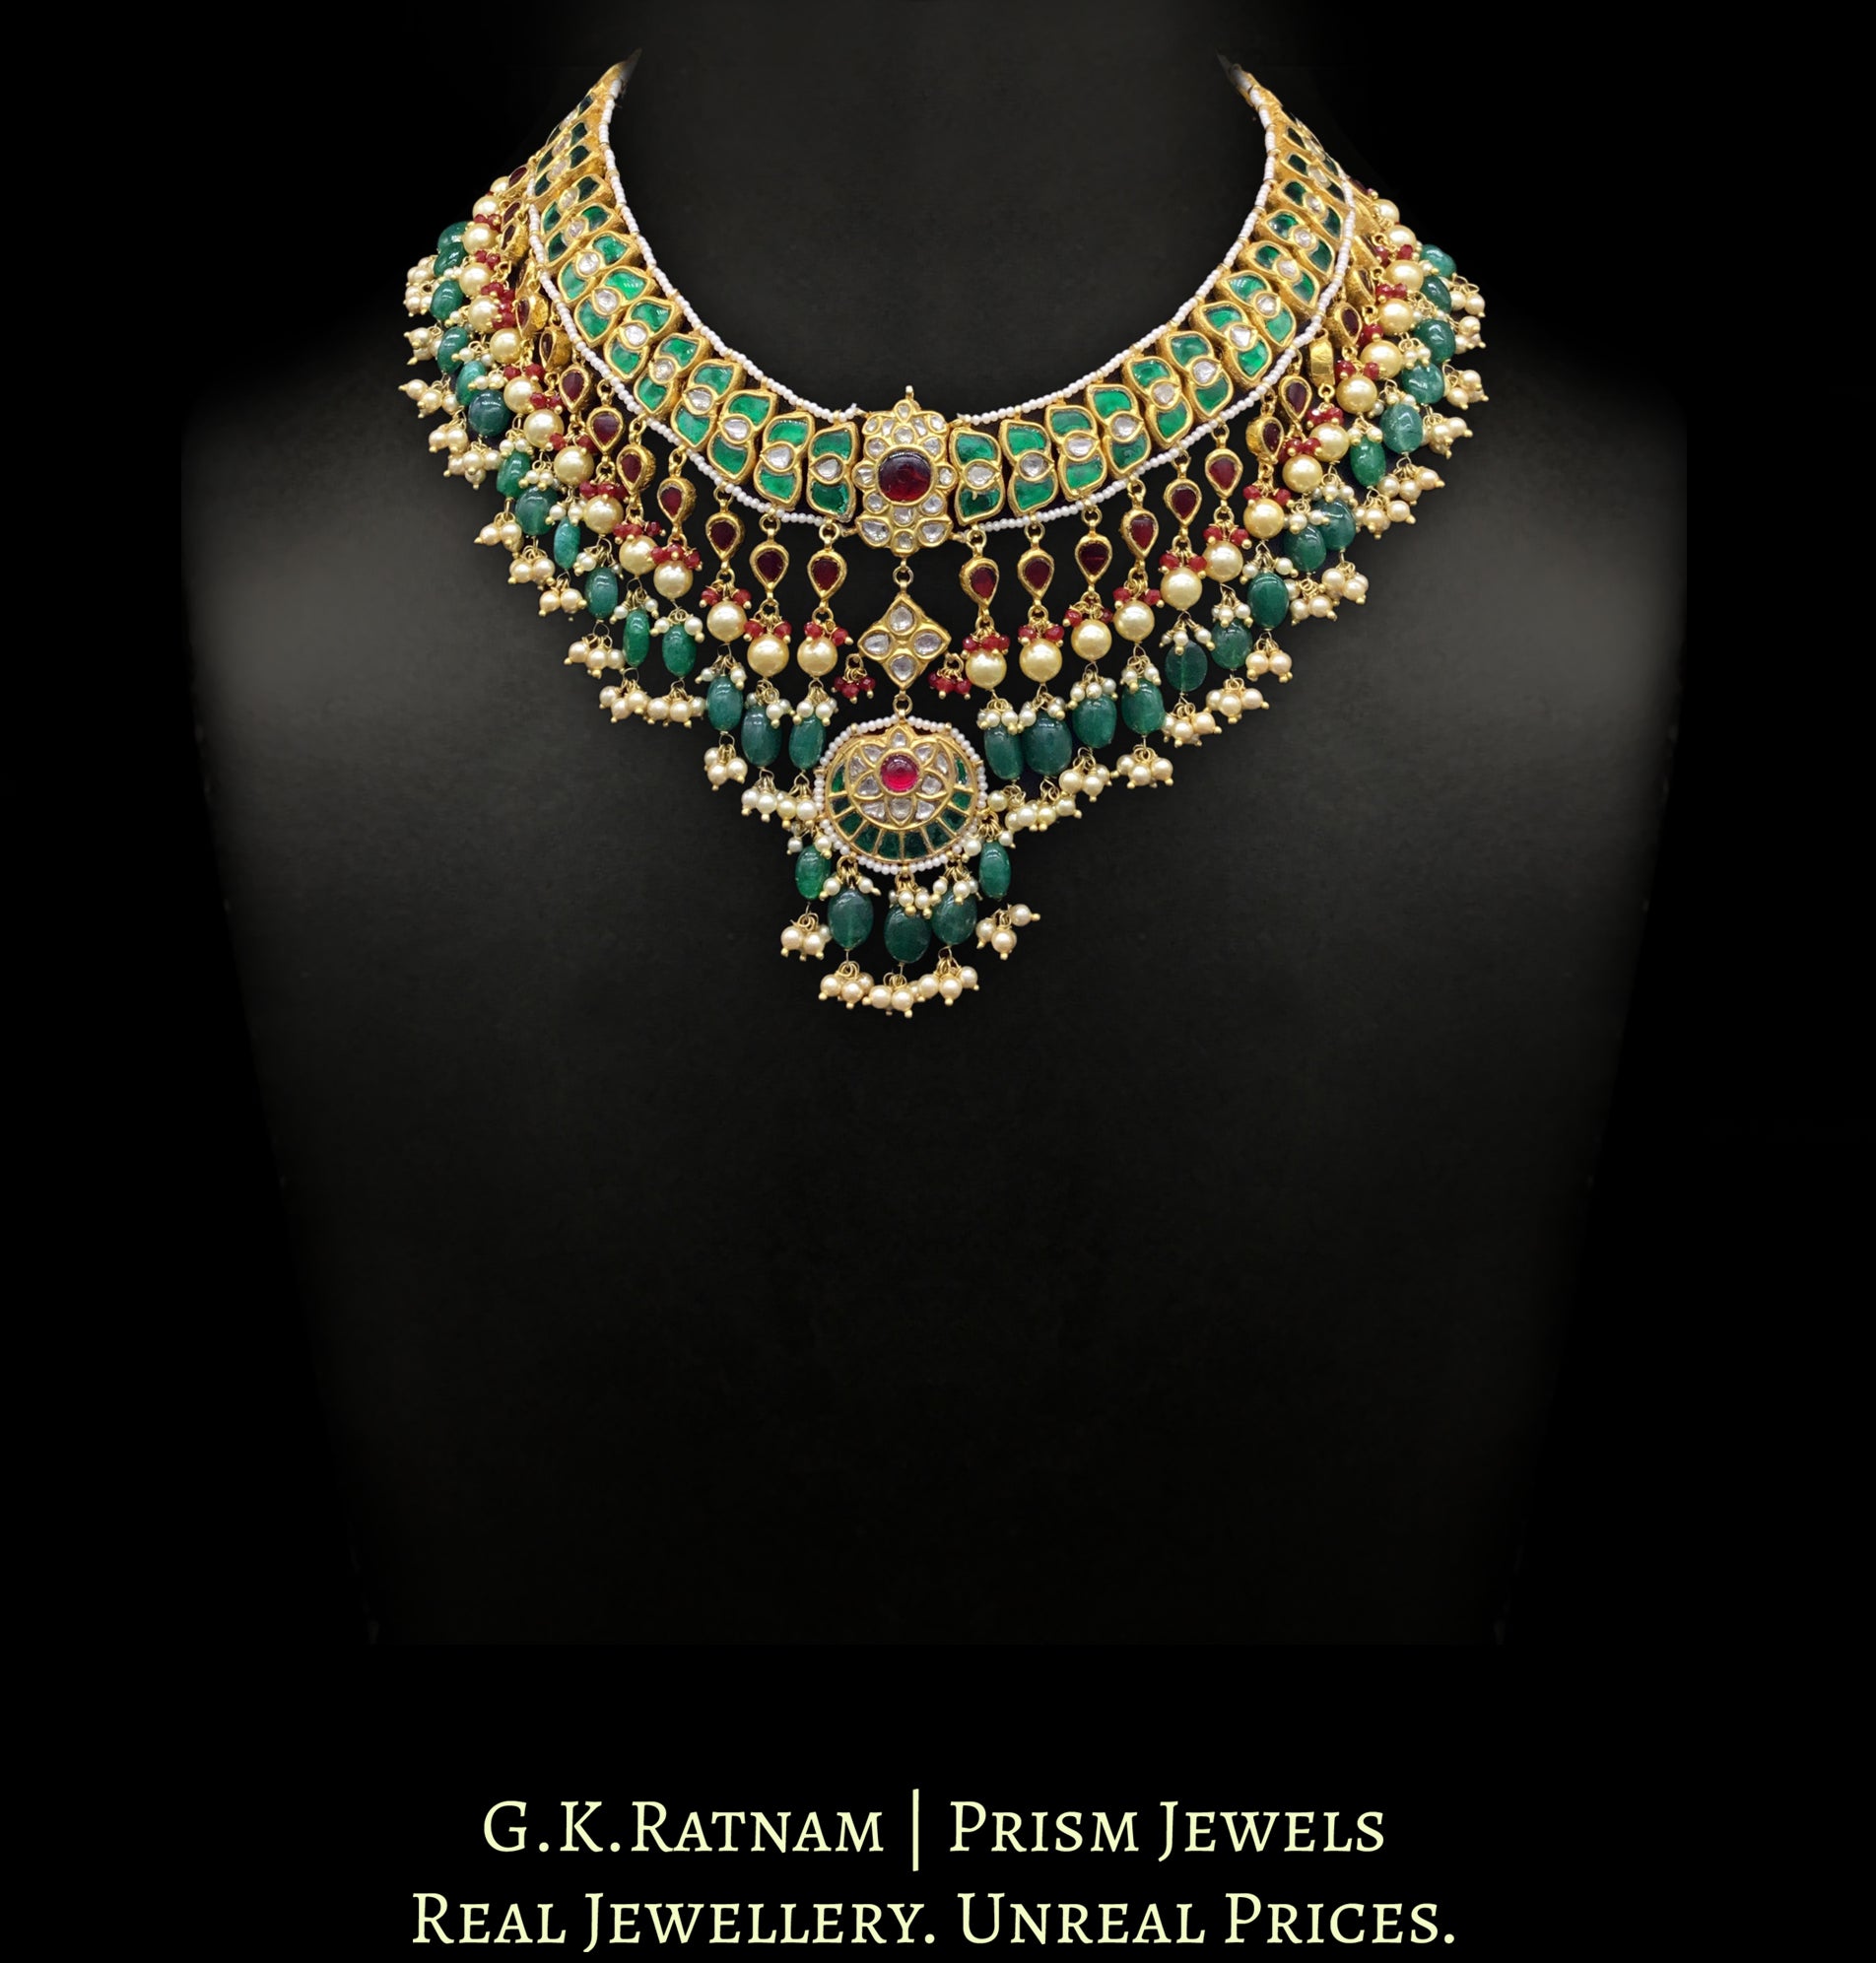 23k Gold and Diamond Polki south-style Necklace Set with ruby-red and emerald-green stones